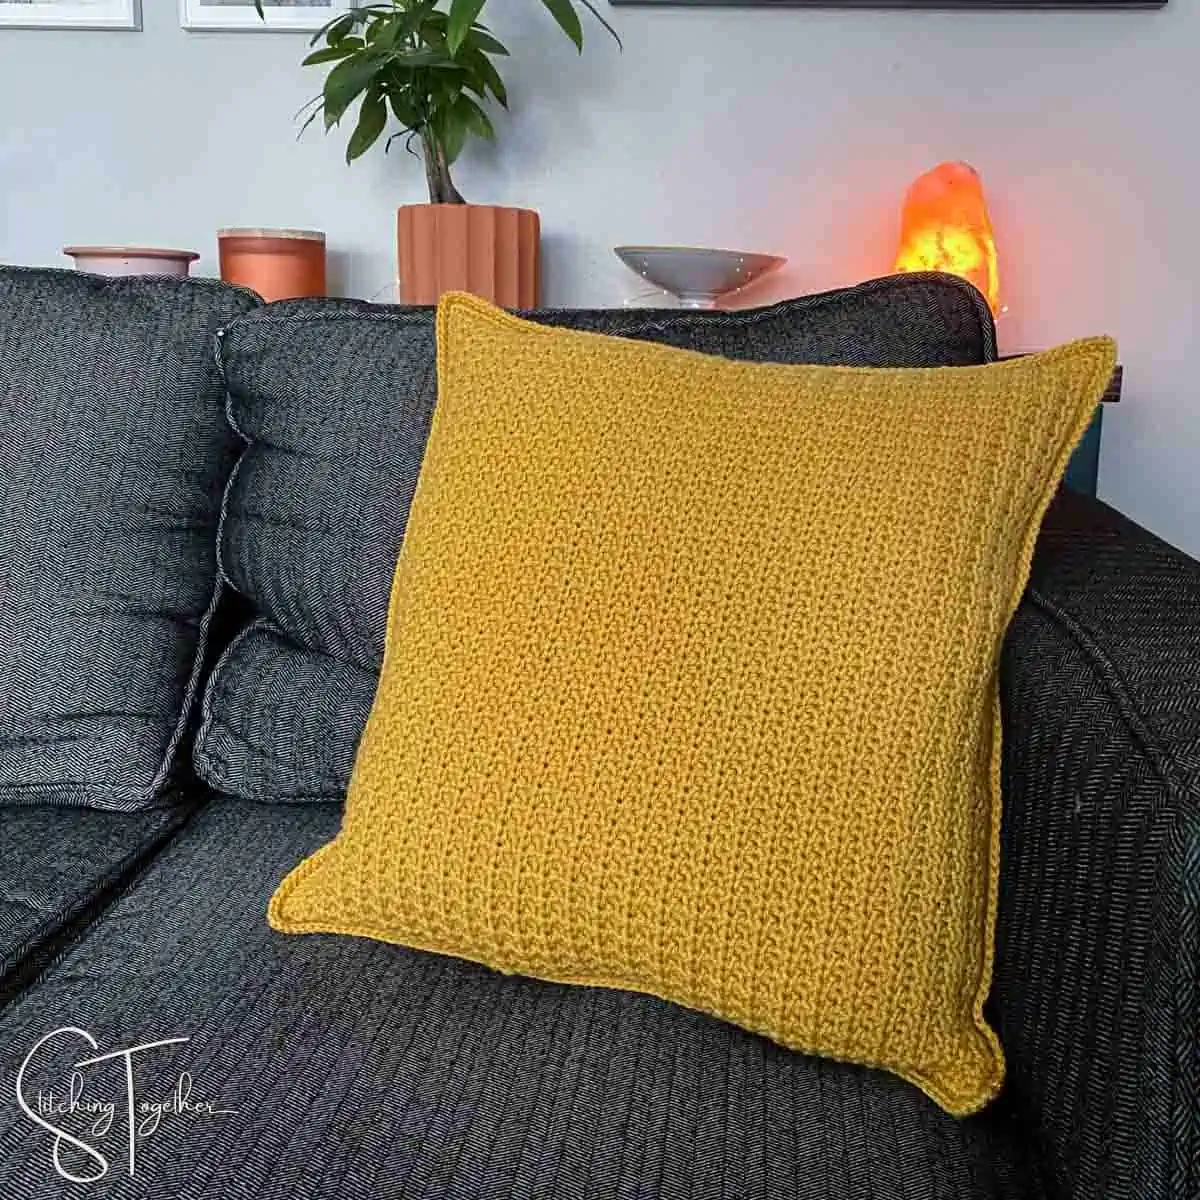 textured crochet pillow sitting on a couch